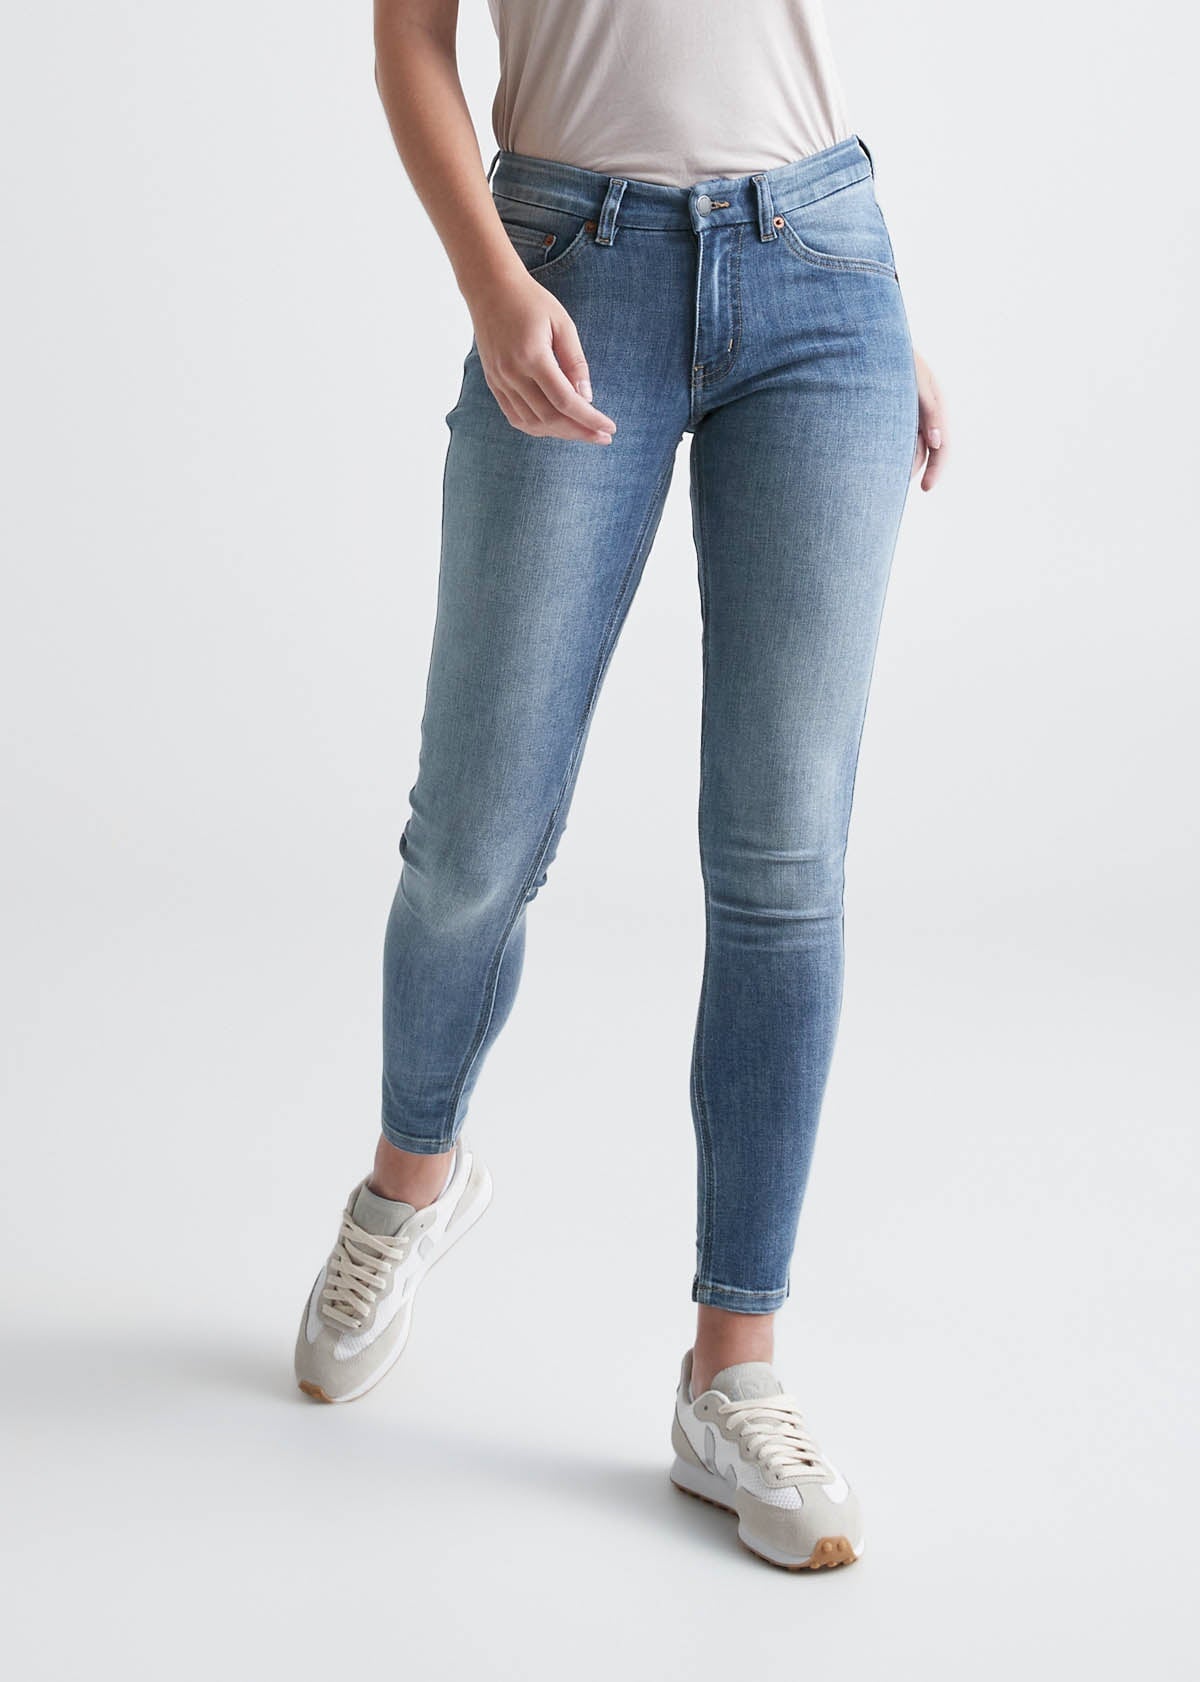 womens light blue mid rise skinny stretch jeans front